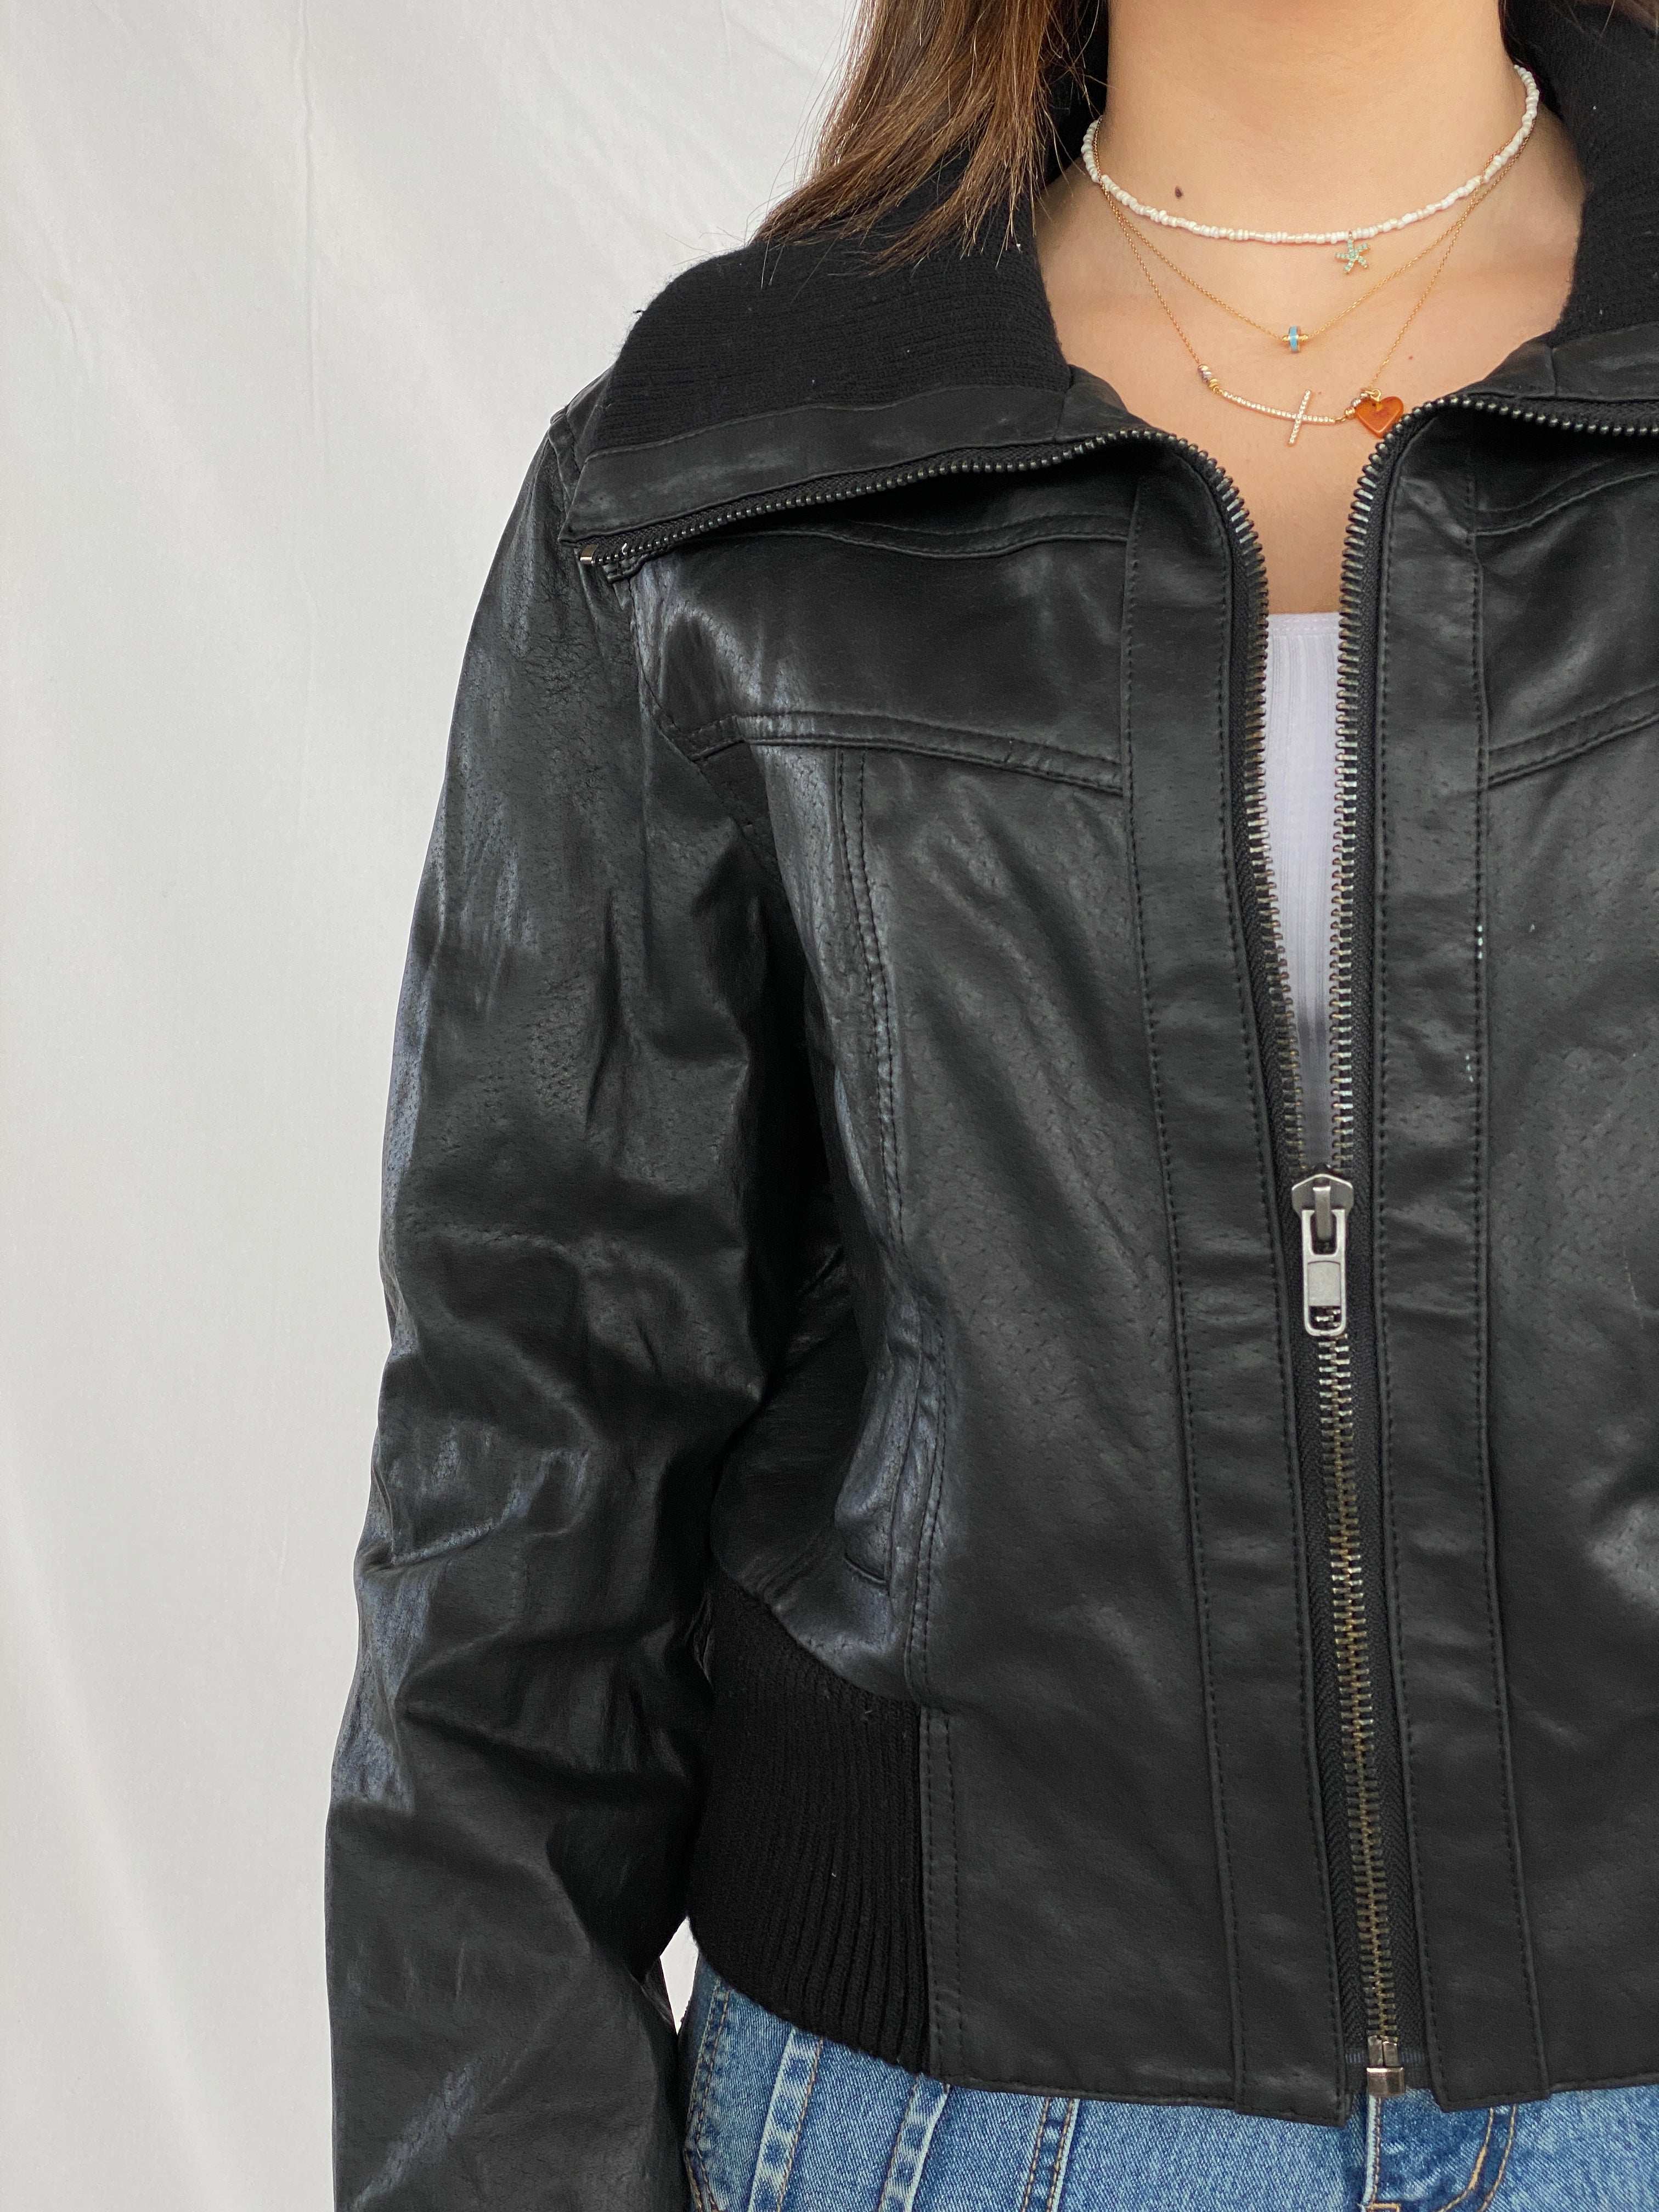 00s Wear Me.. Work Me.. Love Me by New Look Genuine Leather Jacket - Balagan Vintage Leather Jacket 00s, black leather, genuine leather, genuine leather jacket, Juana, leather jacket, NEW IN